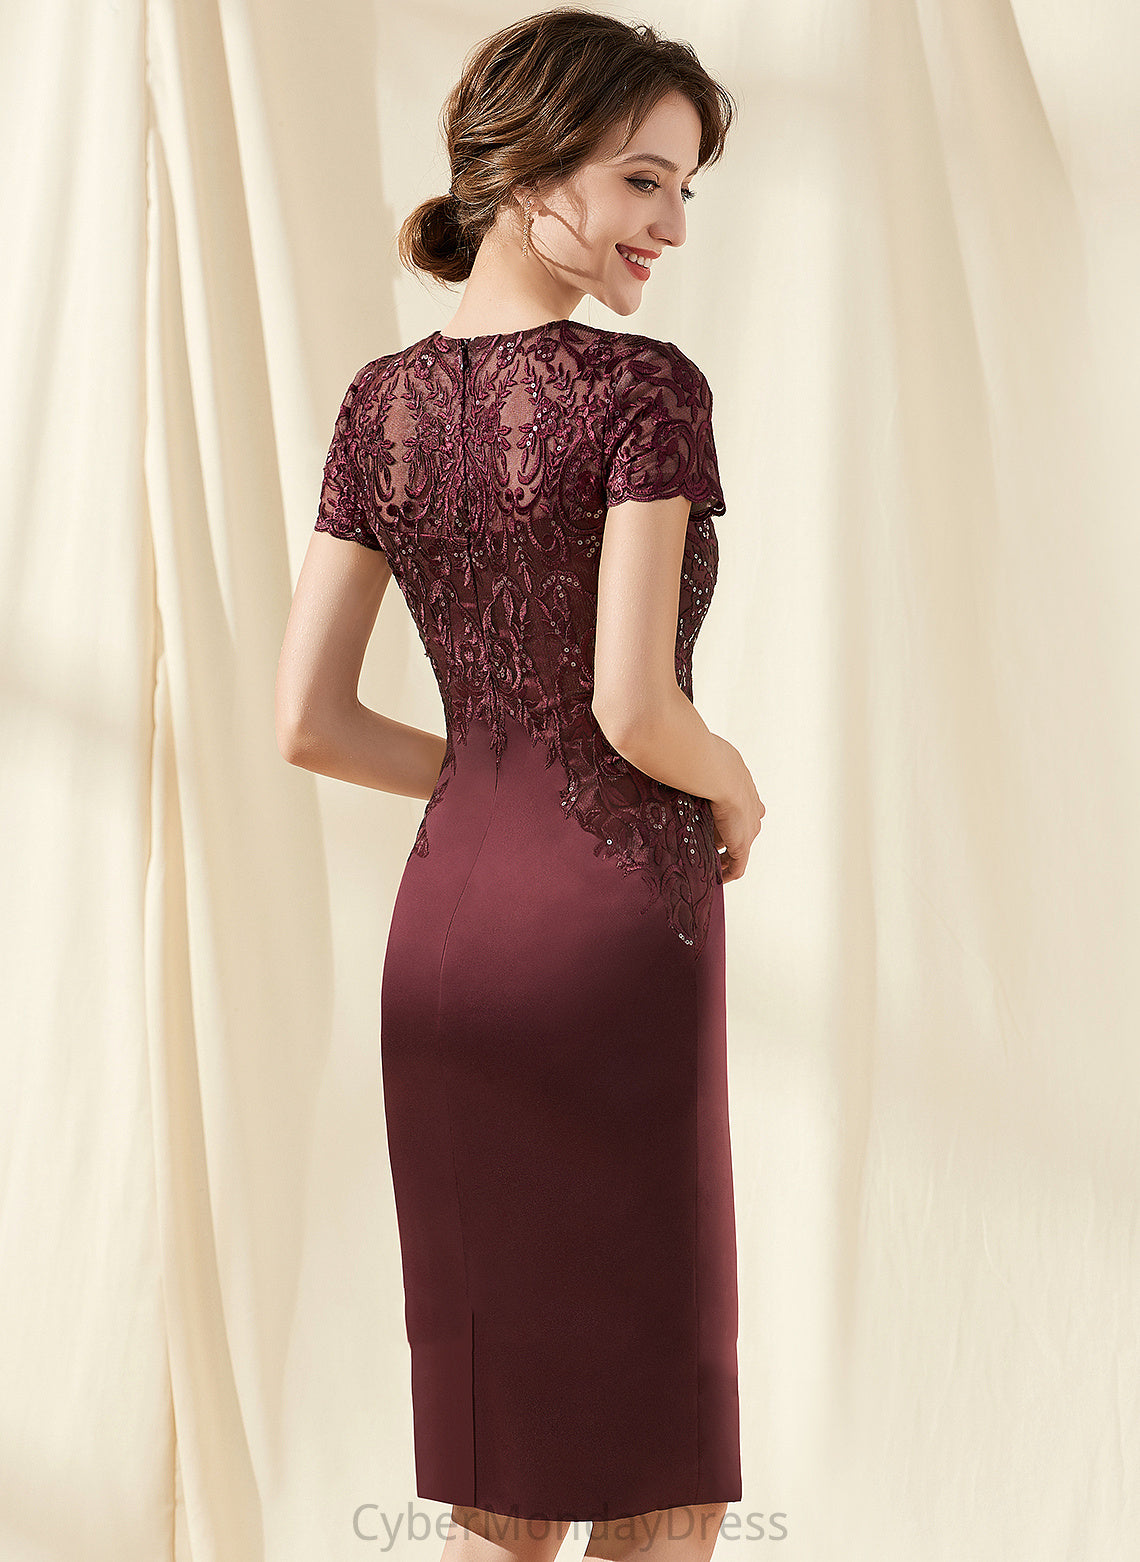 Sheath/Column Scoop Knee-Length Lace Cocktail Dresses Sequins Shannon With Neck Satin Cocktail Dress